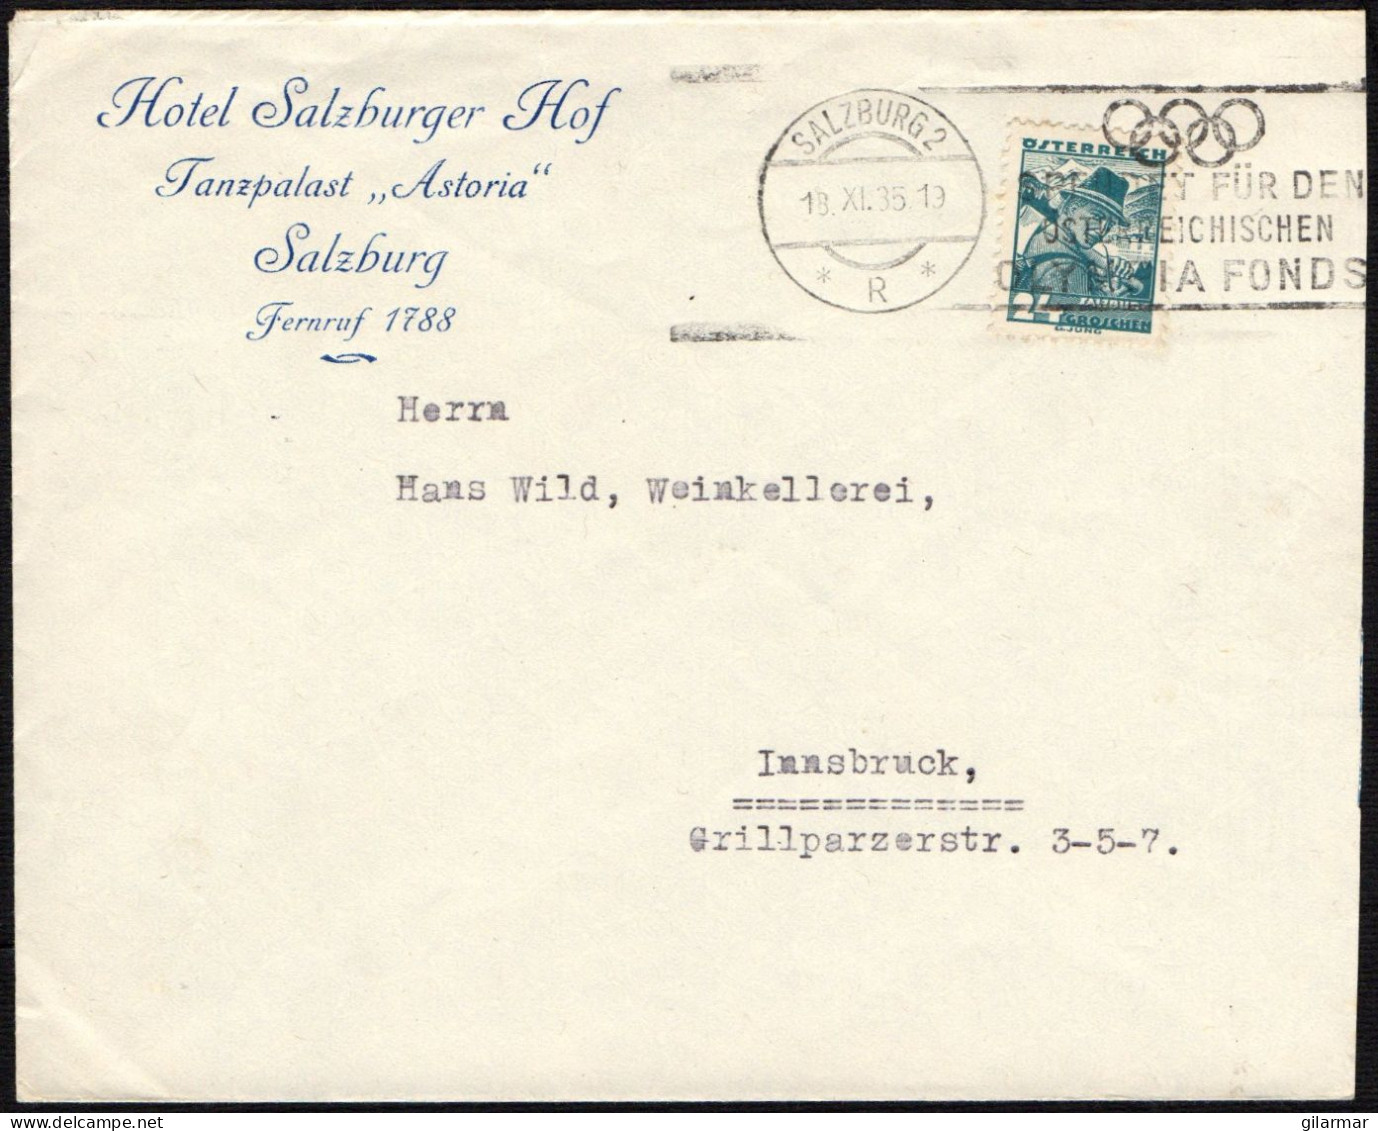 OLYMPIC GAMES 1936 - AUSTRIA SALZBURG 1935 - DONATE TO THE AUSTRIAN OLYMPIC FUND - MAILED ENVELOPE - M - Ete 1936: Berlin